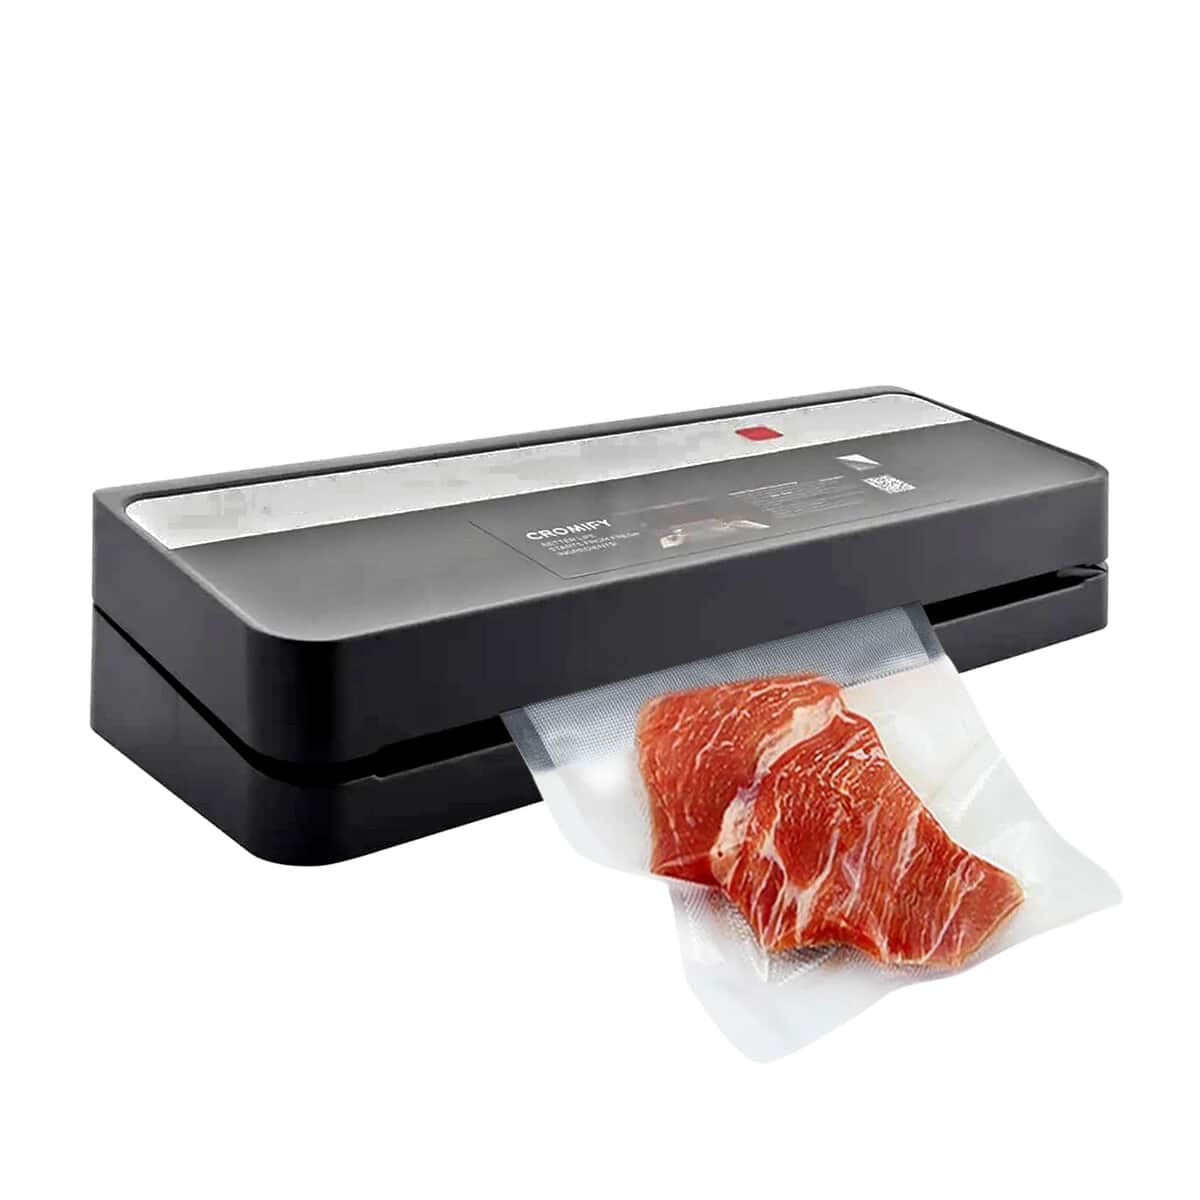 Cormify Black Vacuum Sealer System e9000-m, Compact Design Vacuum Sealing Machine For Automatic Food Sealer image number 0